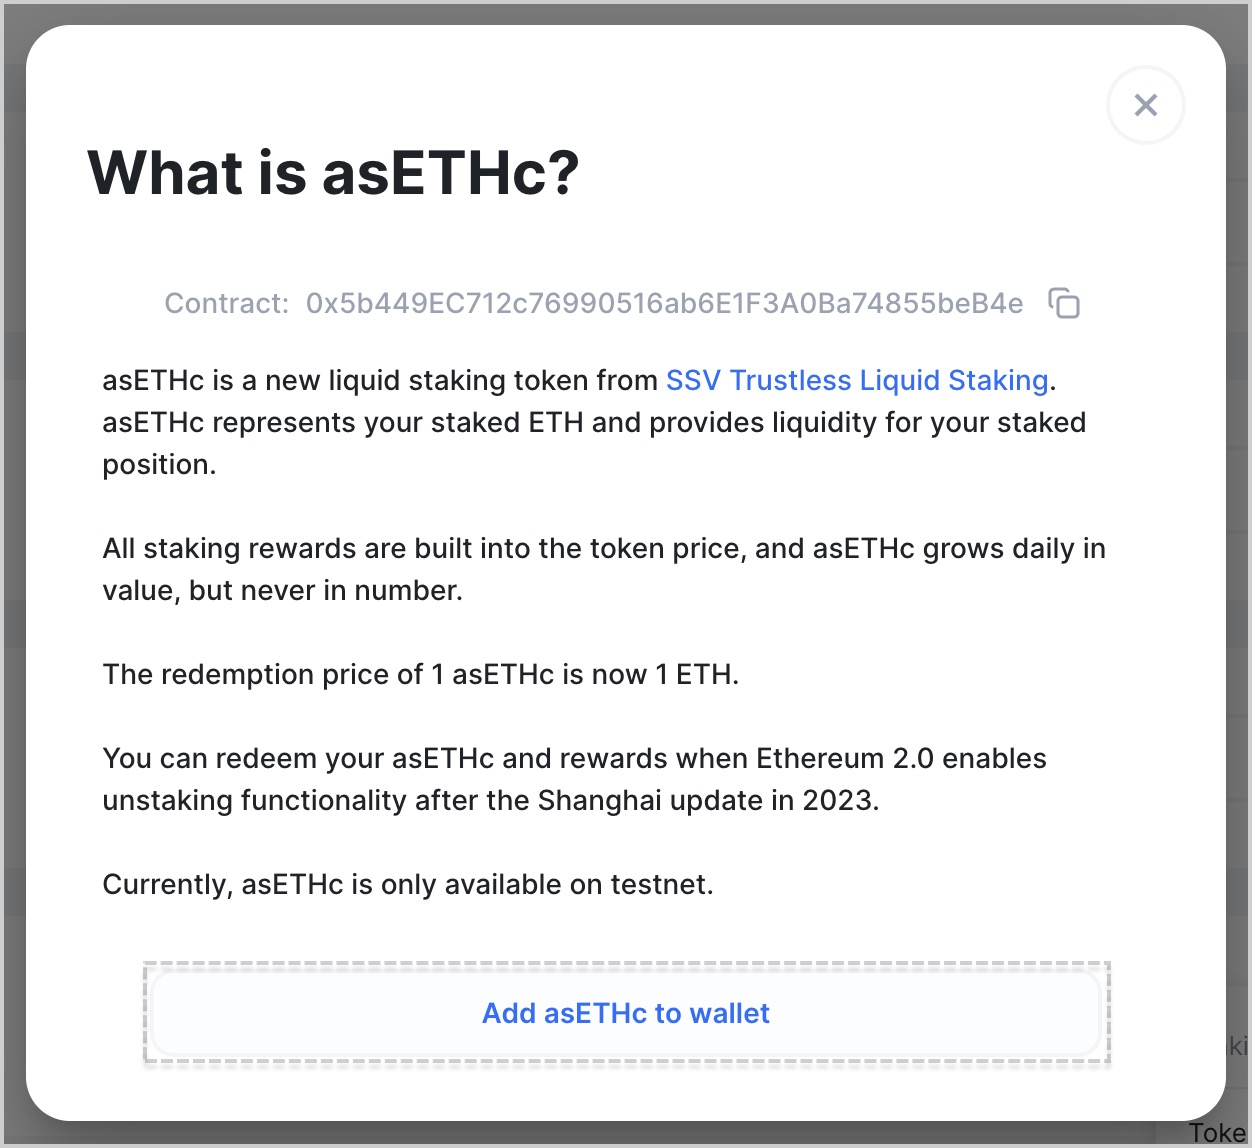 Click Add asETHc to wallet